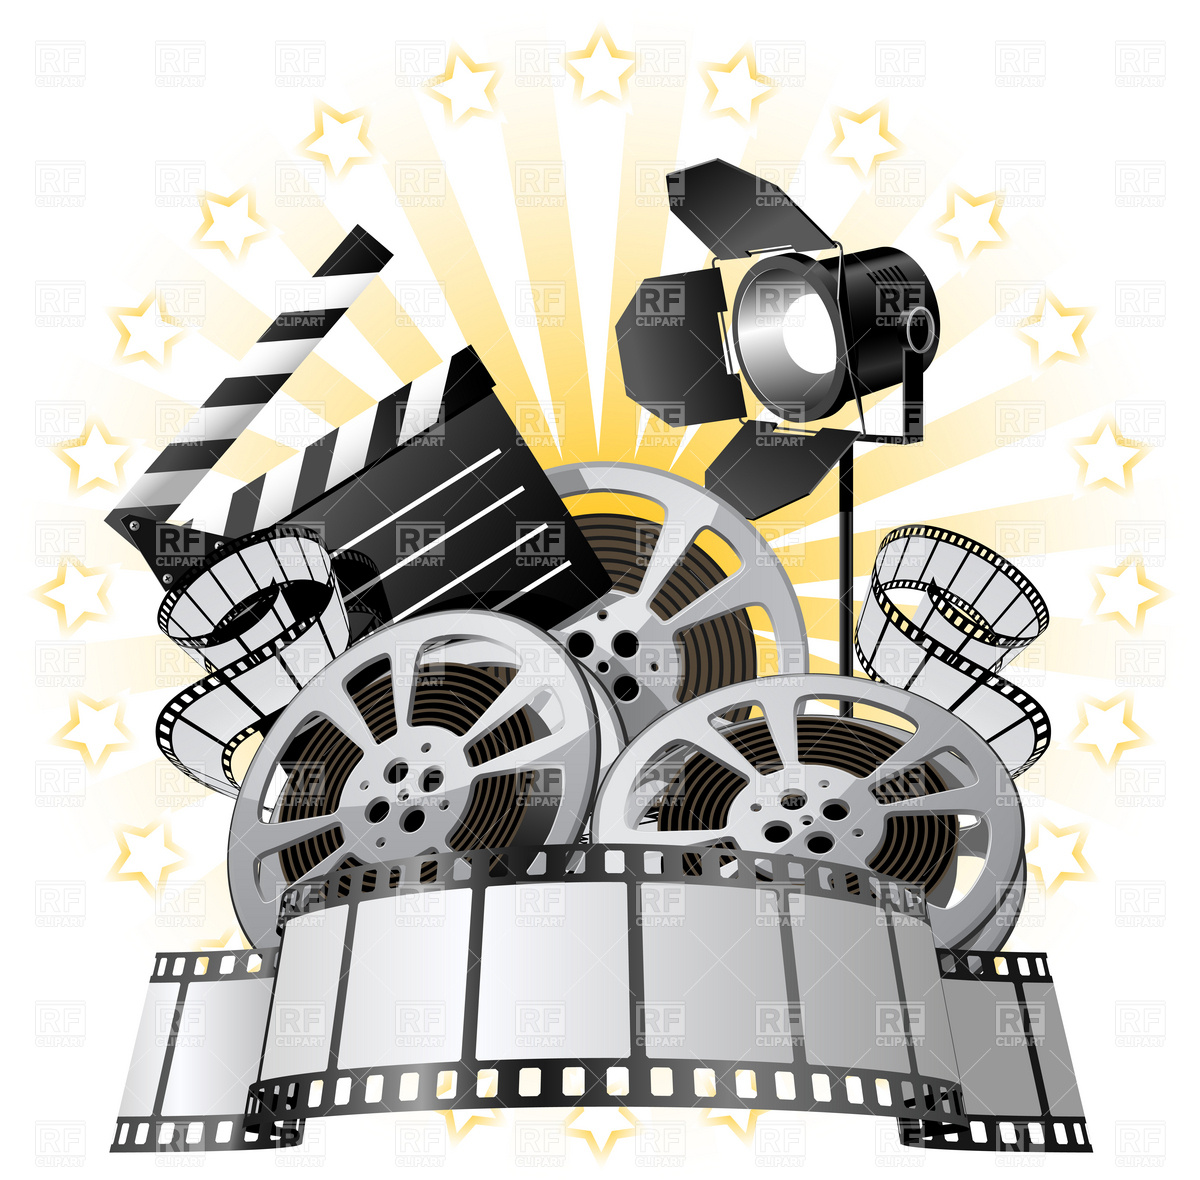 Film Premiere Poster With Film Reels And Film Slate Download Royalty